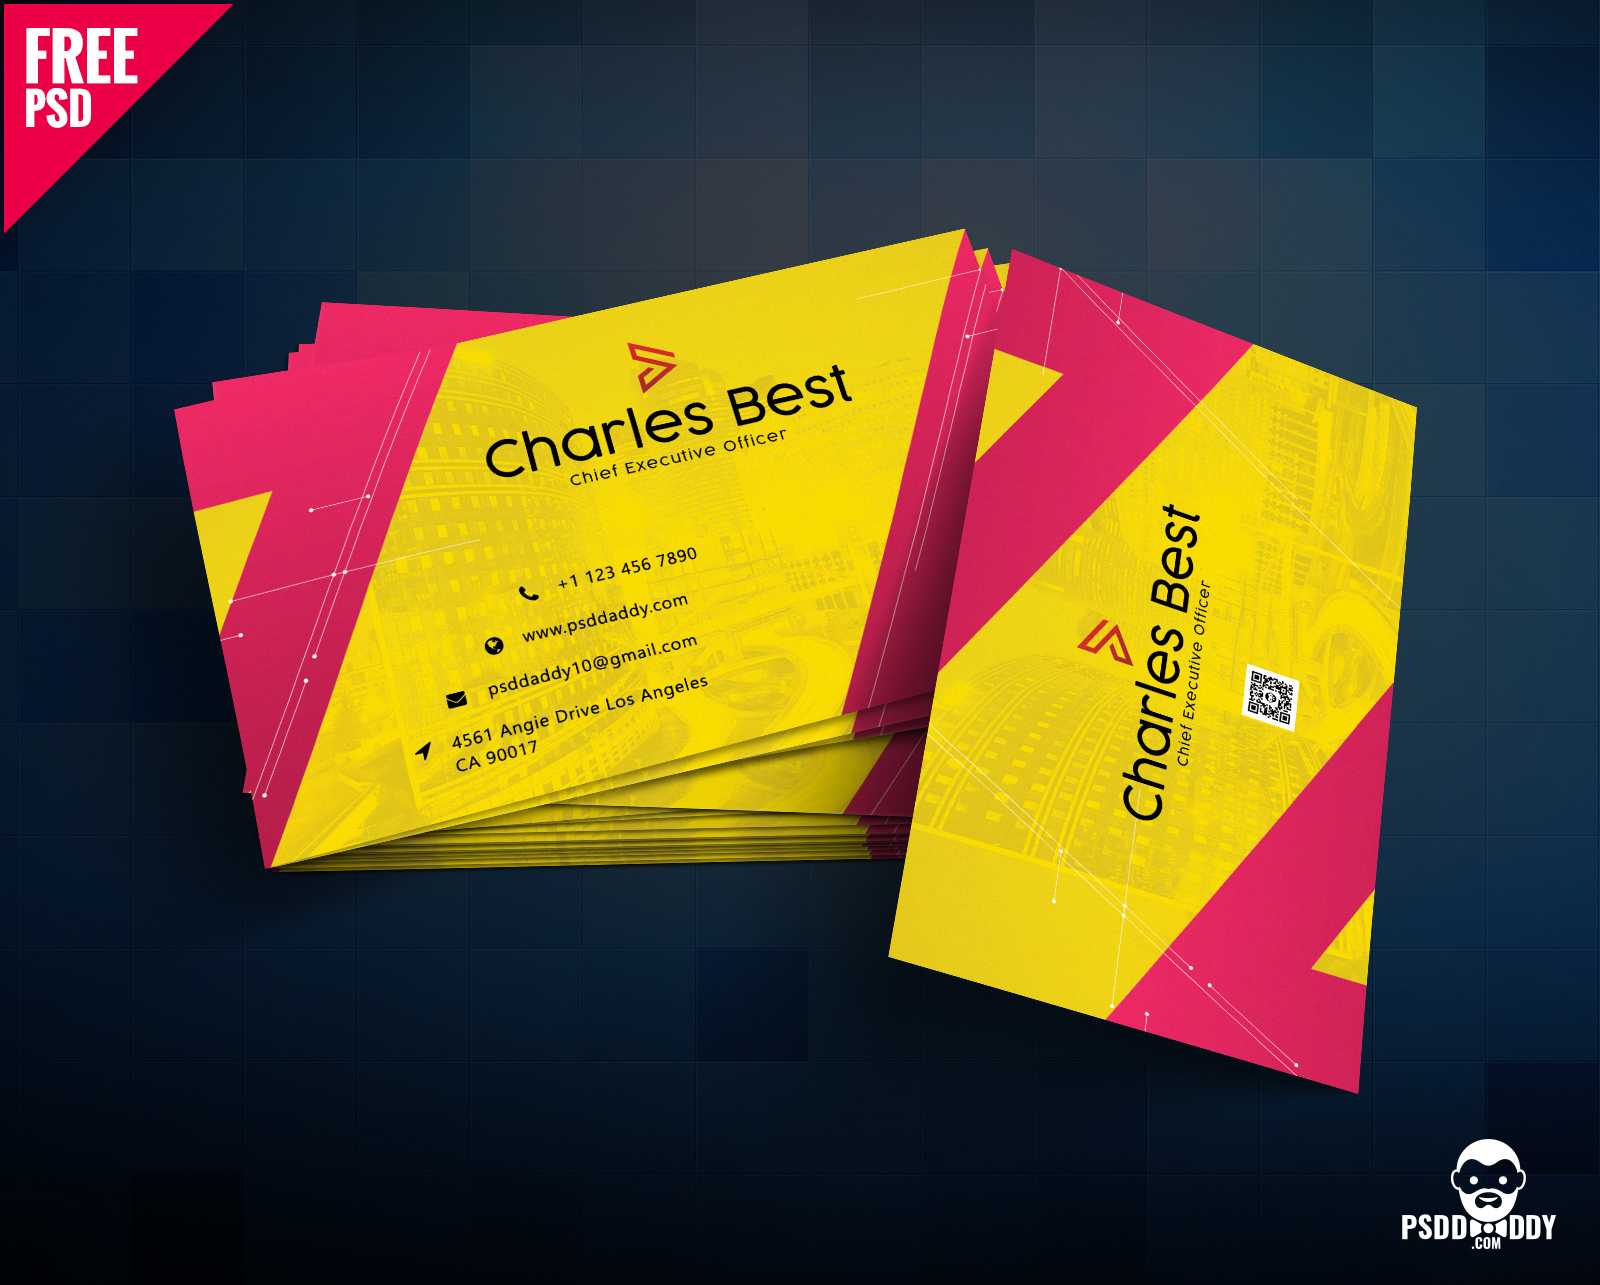 Download] Creative Business Card Free Psd | Psddaddy Pertaining To Visiting Card Psd Template Free Download